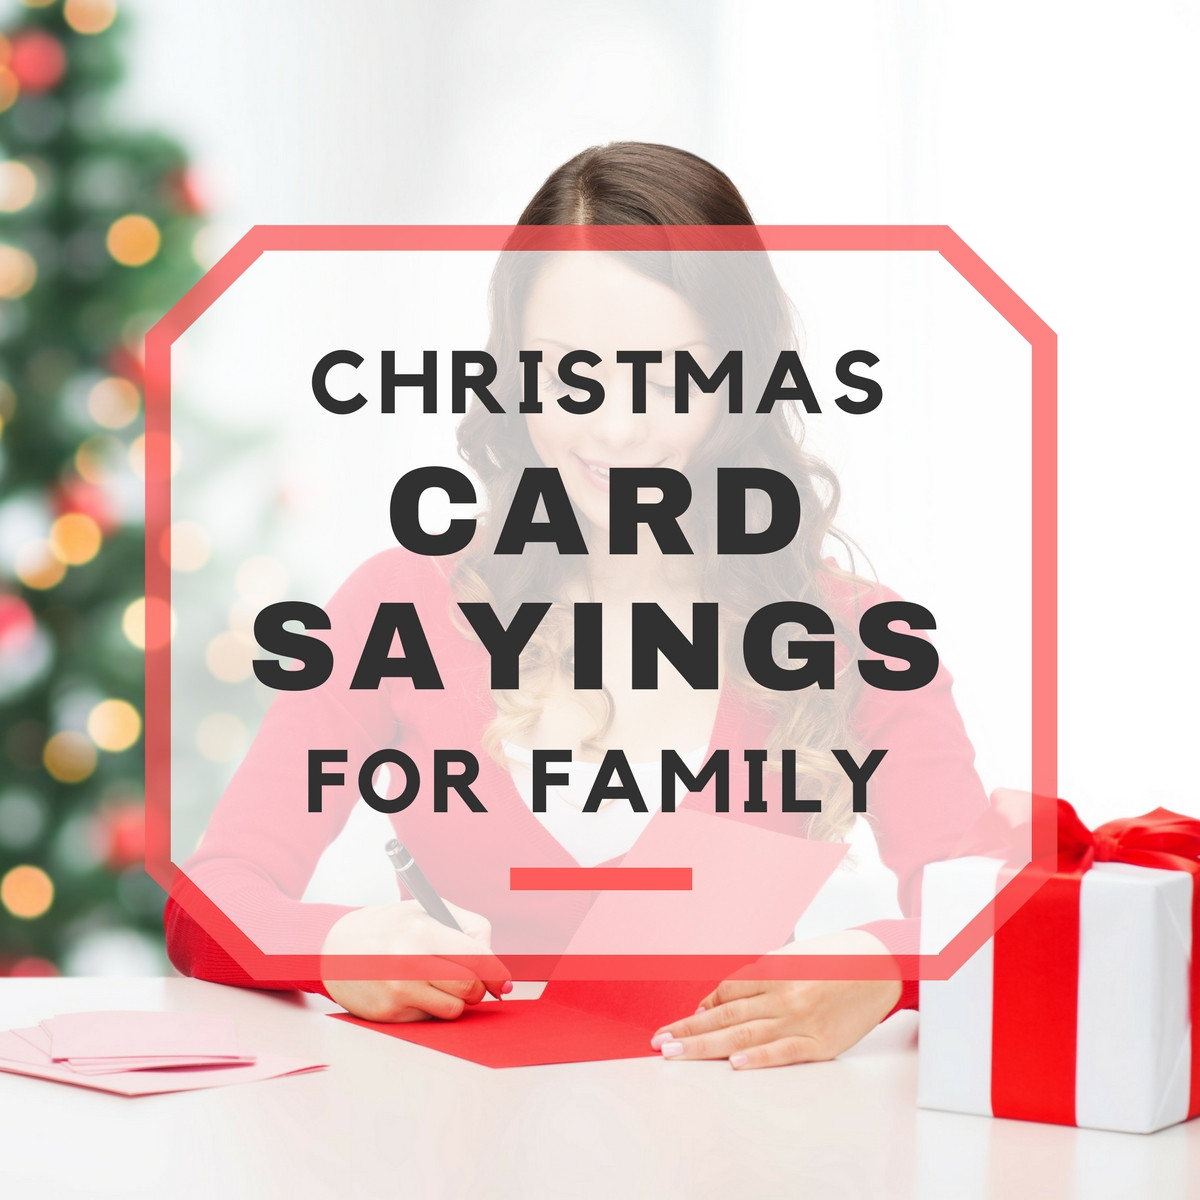 Quotes For Christmas Card
 25 Christmas Card Sayings for Family